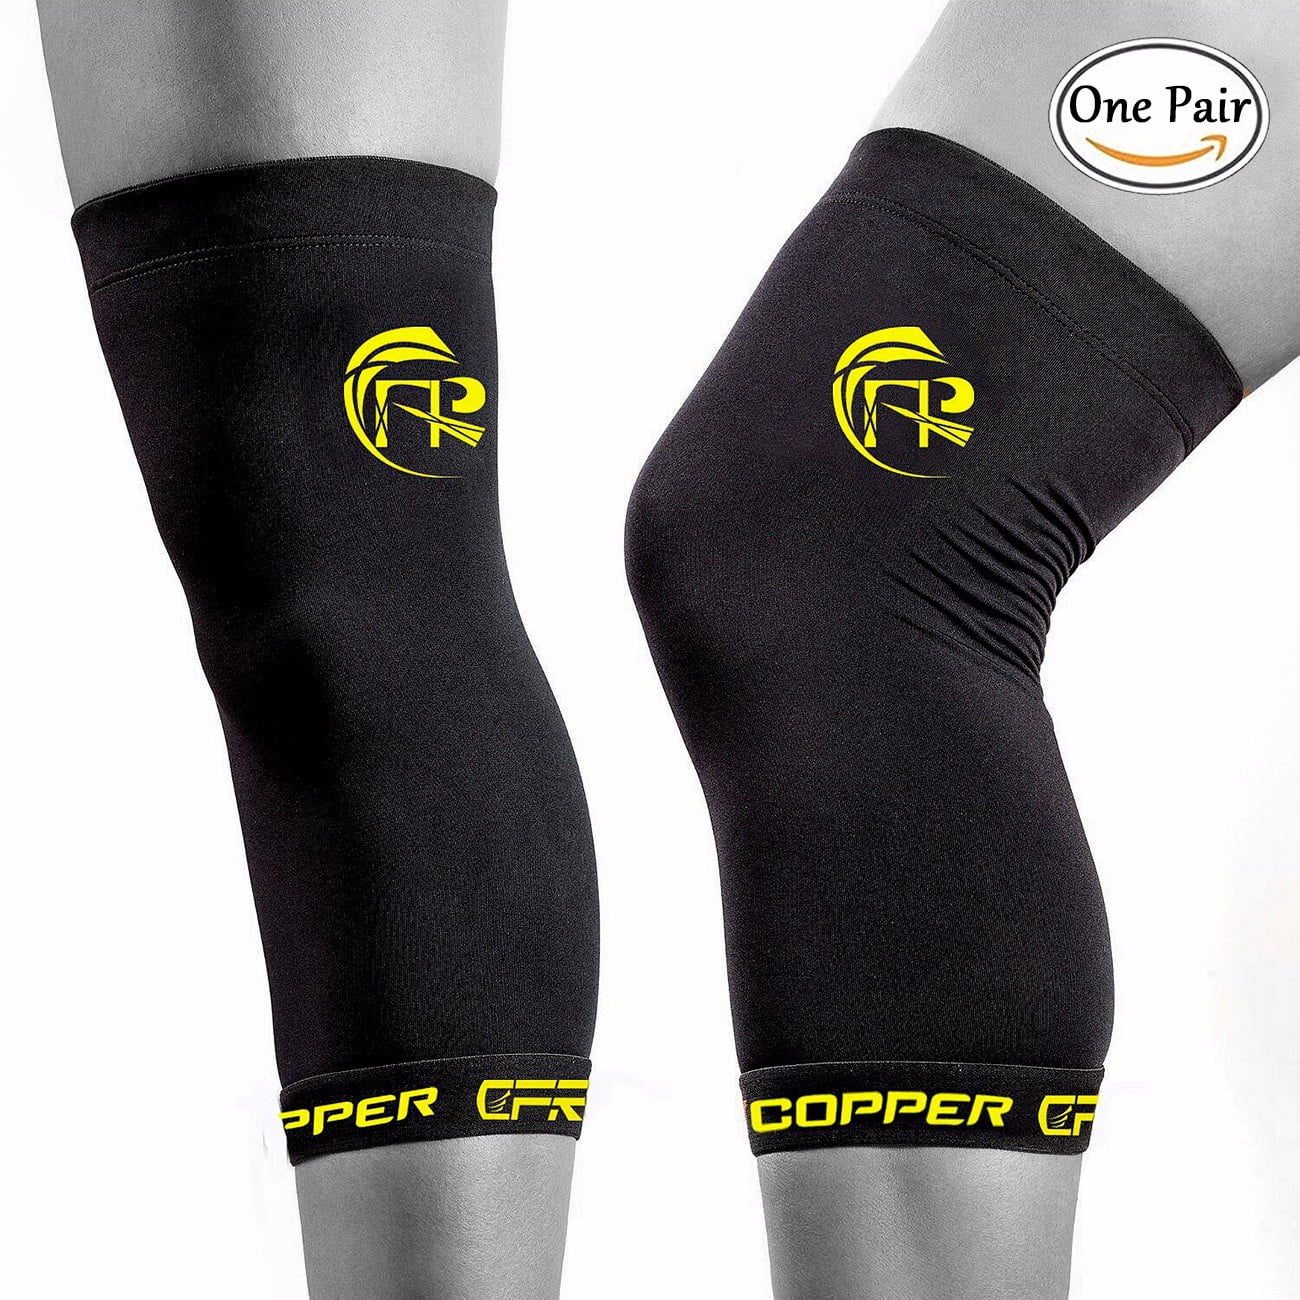 Details about   ALIVE MAGNETICS MEN'S COMPRESSION POWER RUNNING CALF SLEEVES SZ L/XL 